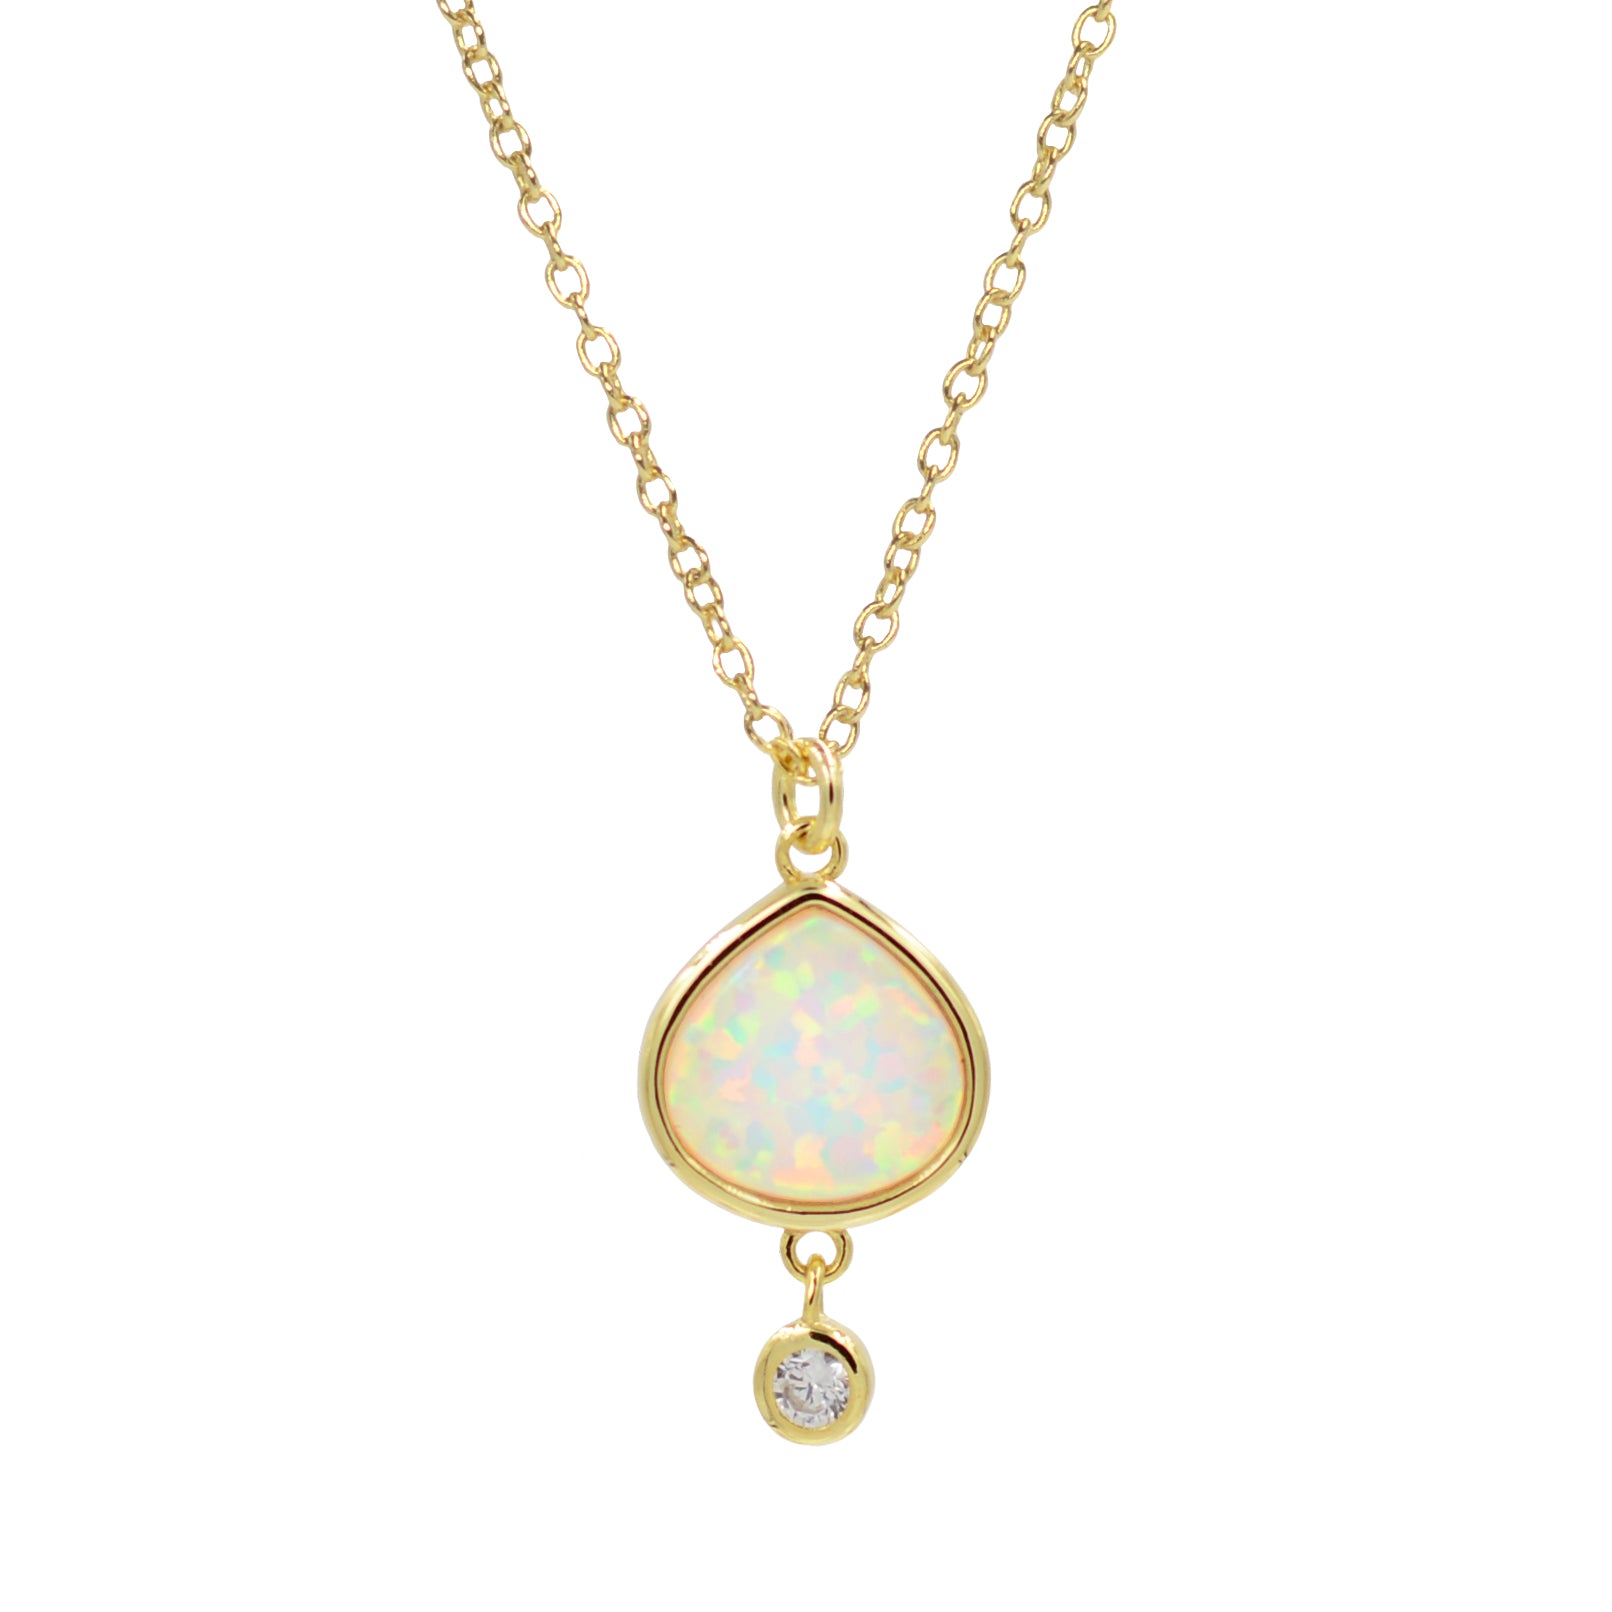 Best Friend white opal pear necklace with crystal drop